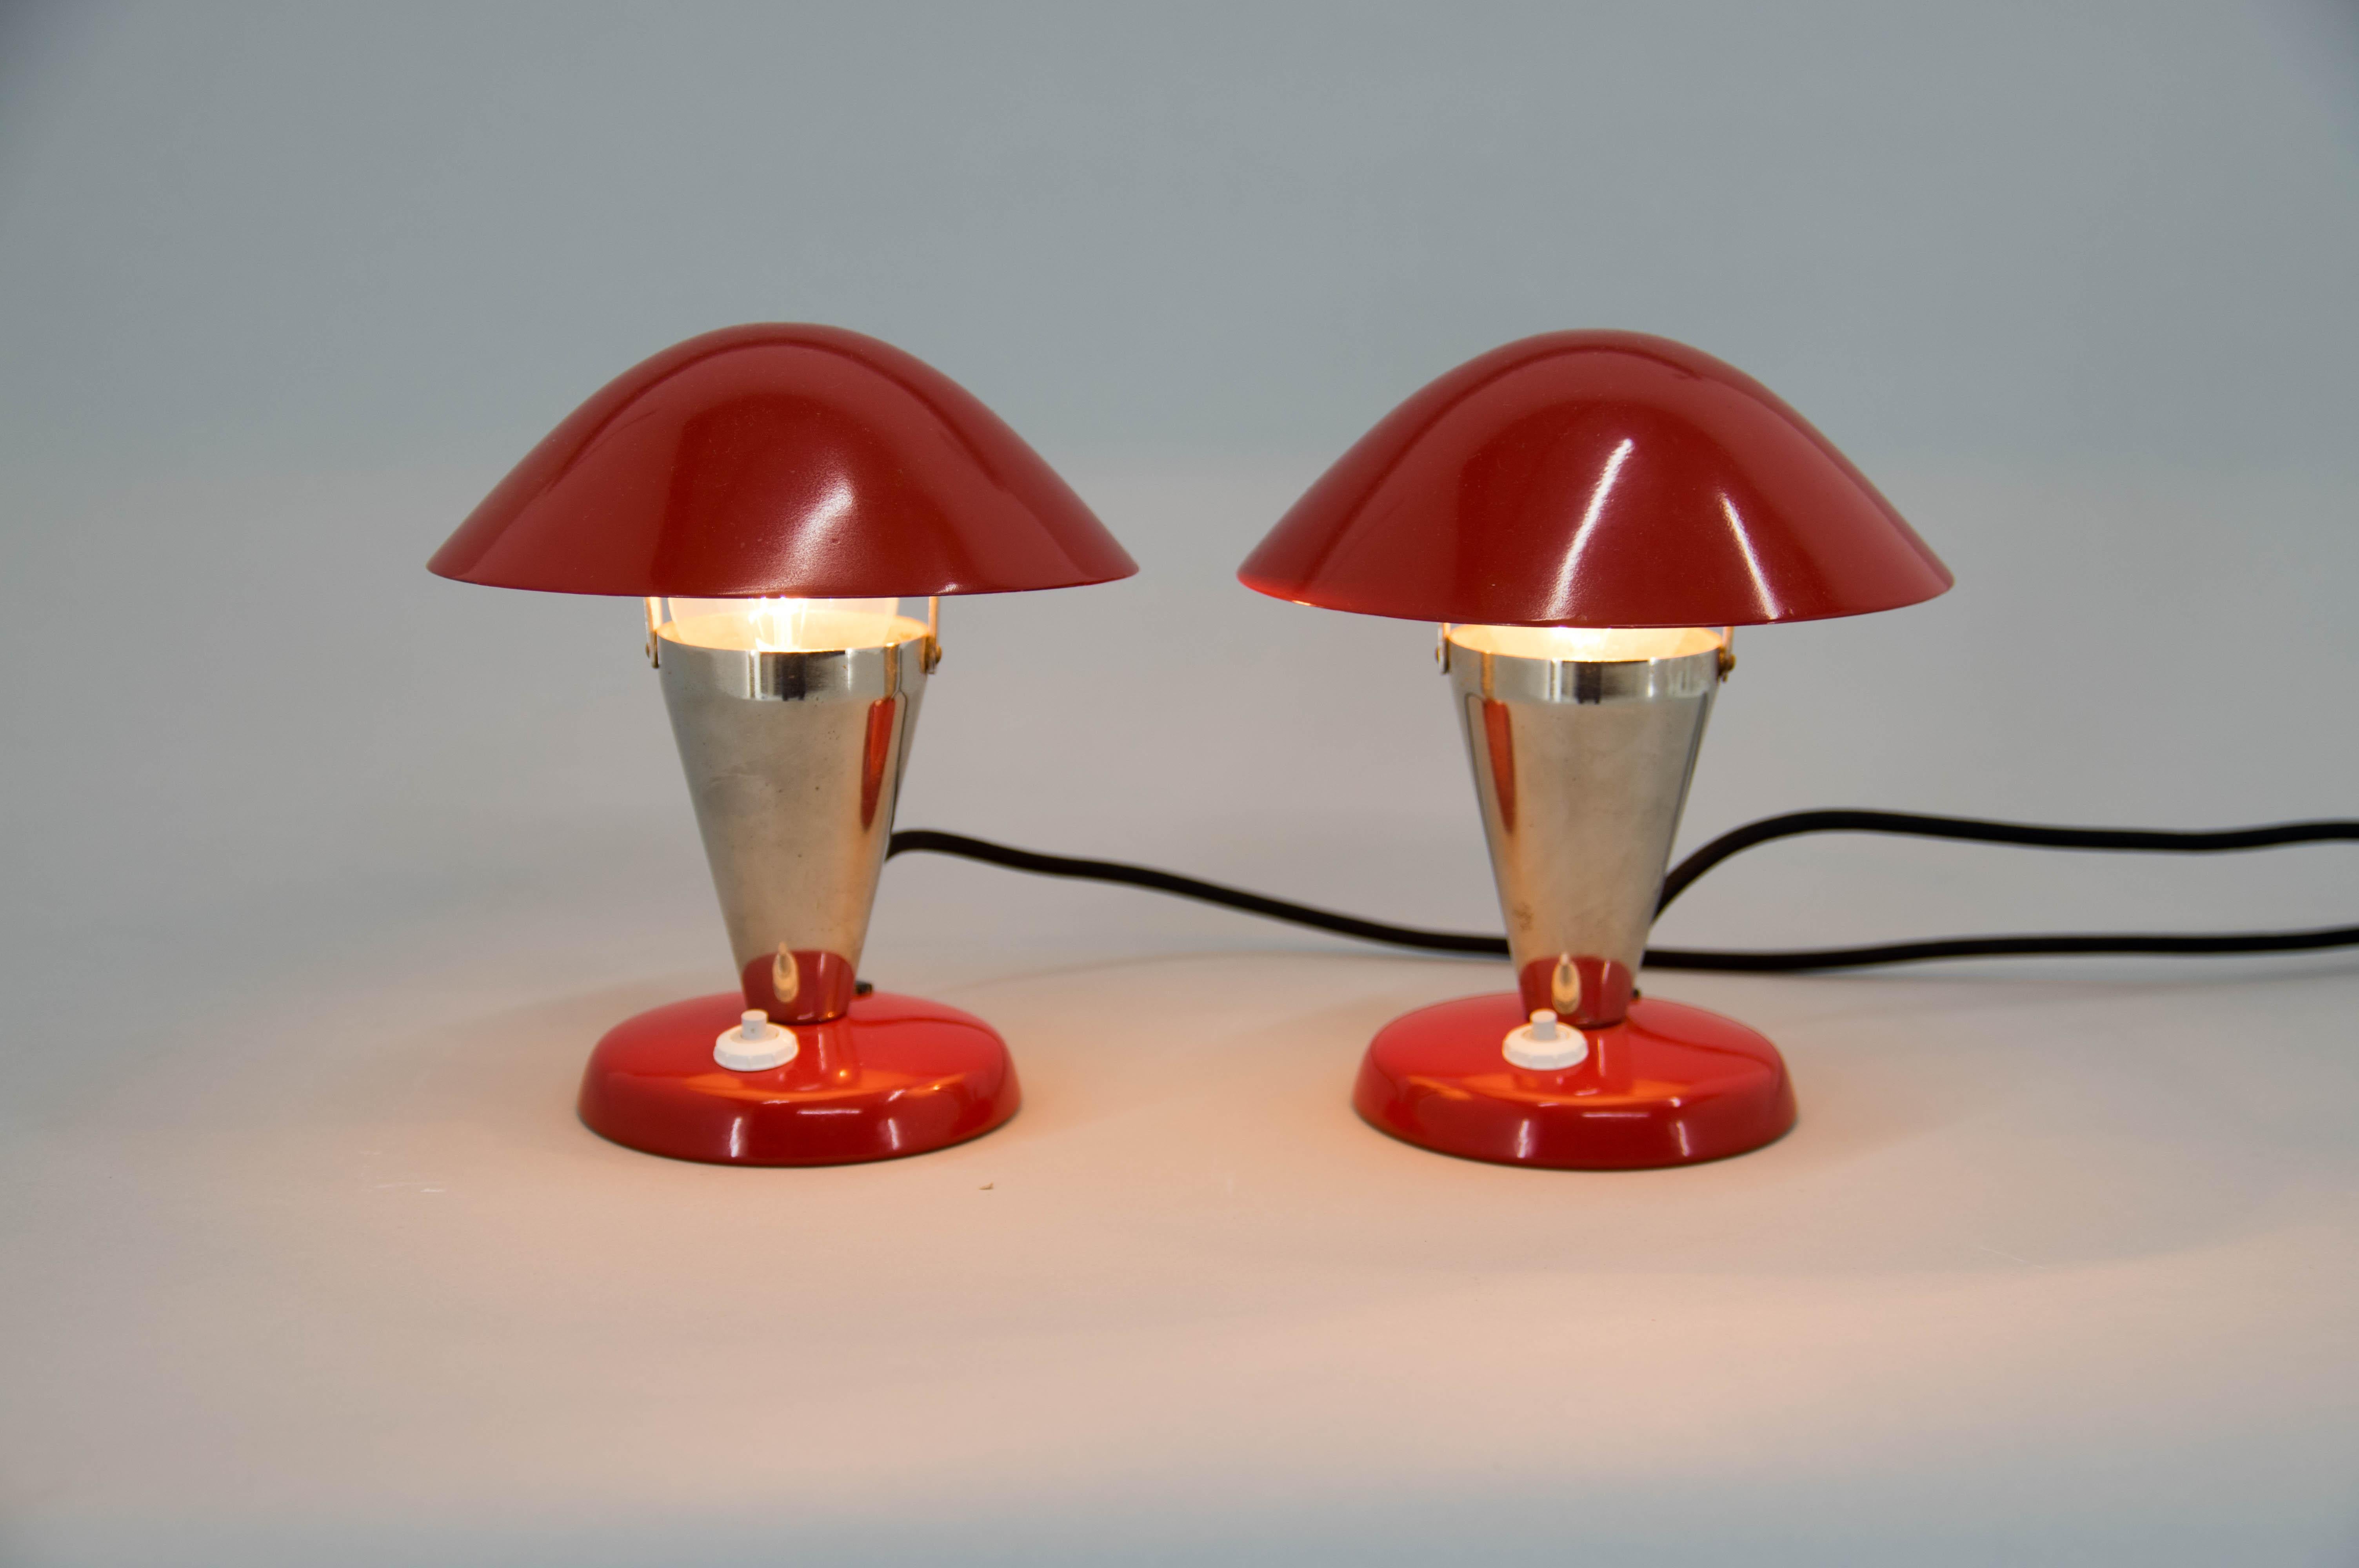 Restored: new red paint, polished, rewired.
1x40W, E25-E27 bulb.
US plug adapter included.